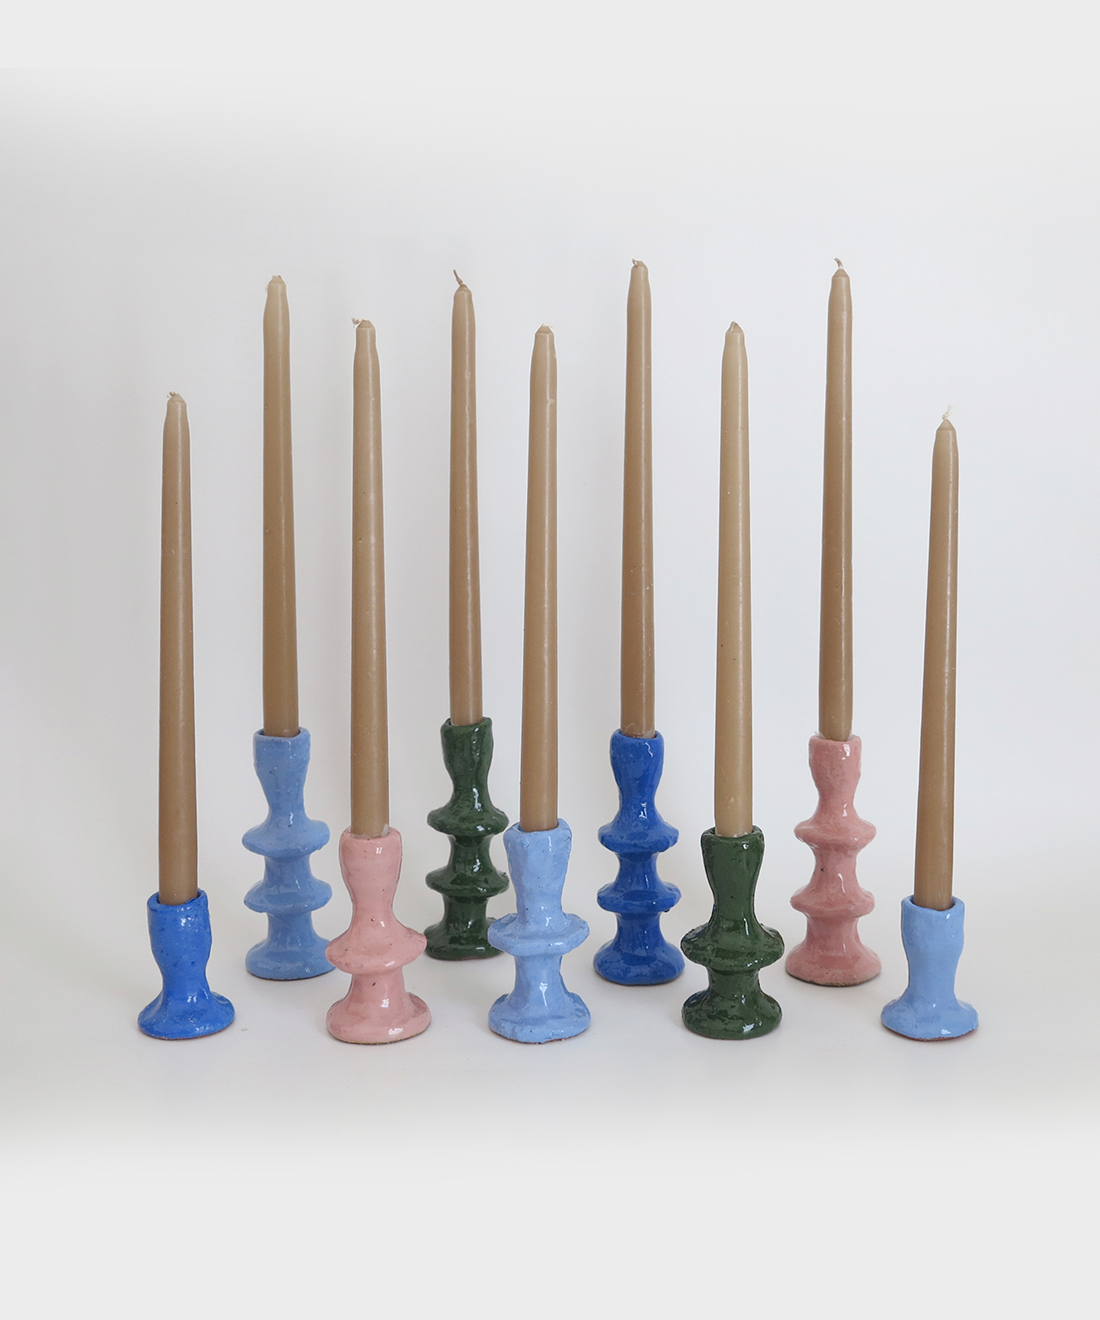 Wonky Candlesticks in Dusty Pink